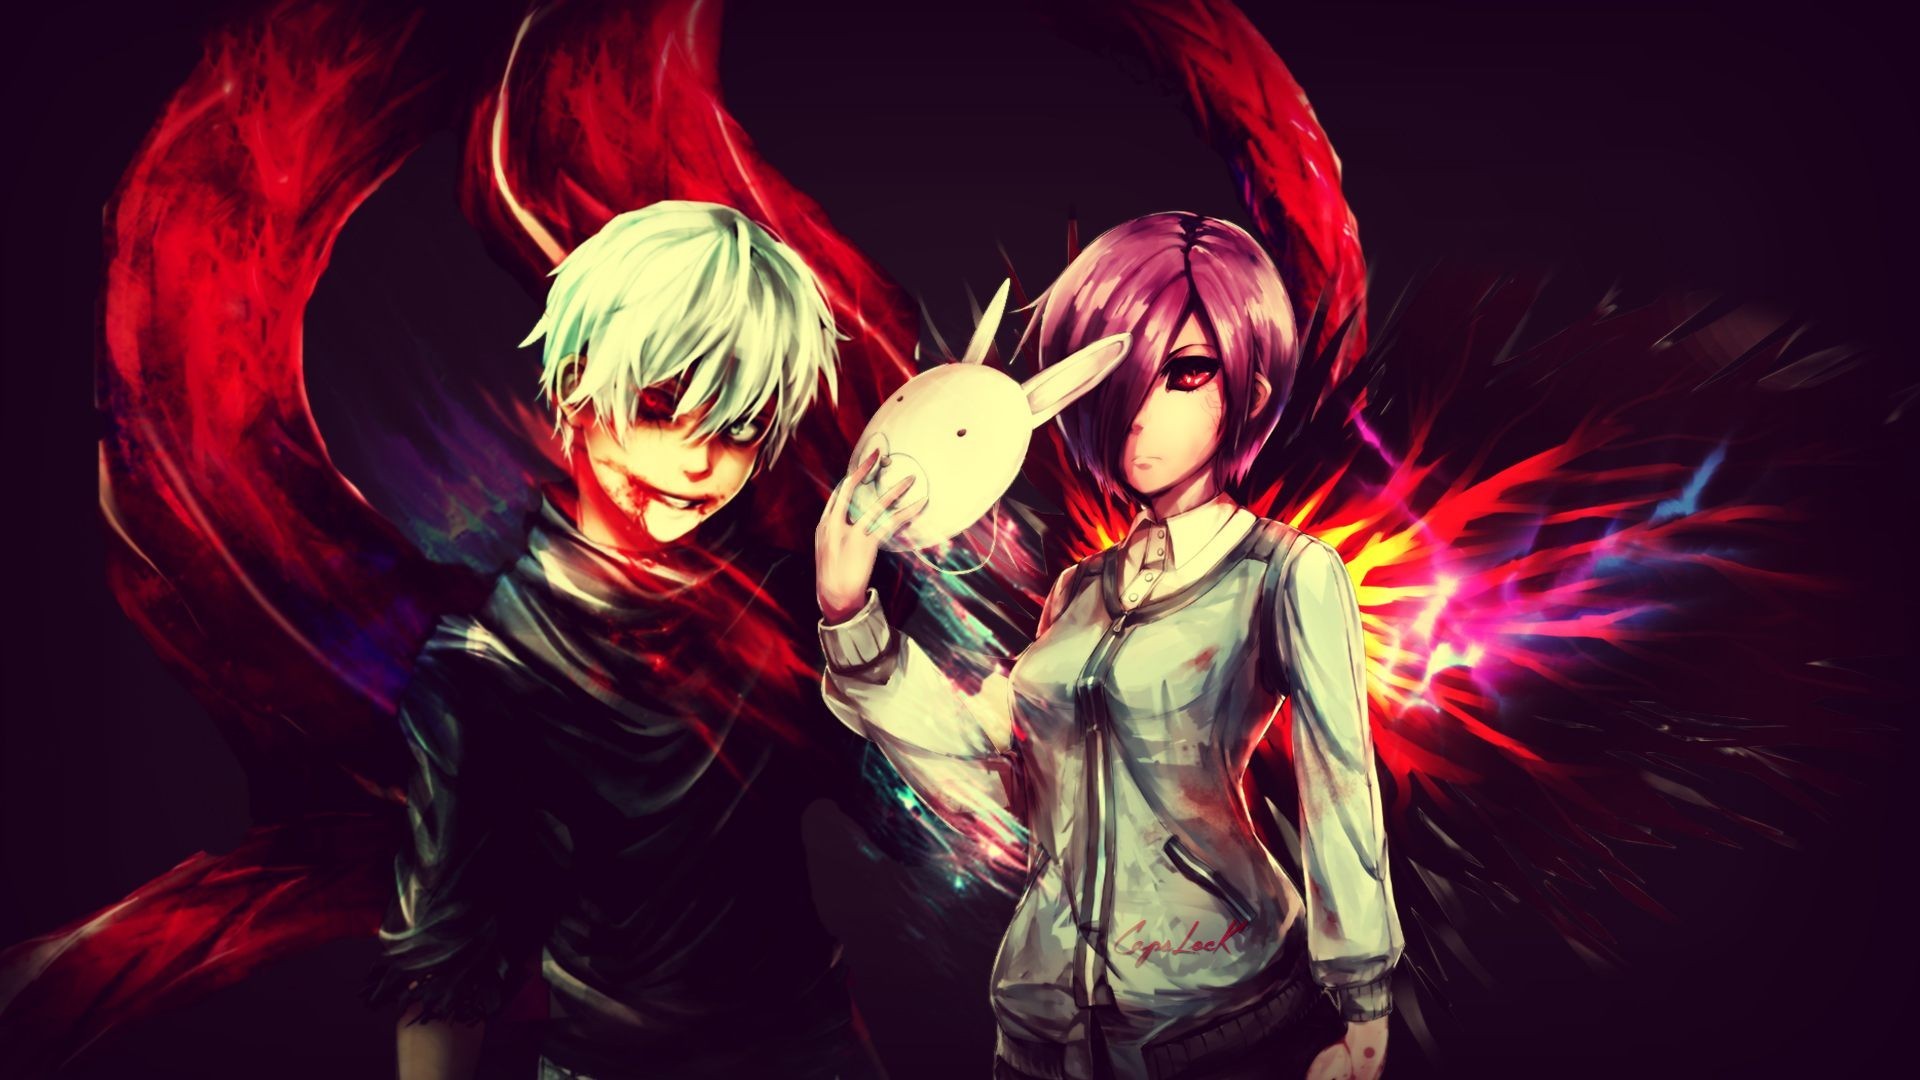 Tokyo Ghoul wallpaper HD ·① Download free cool backgrounds ...